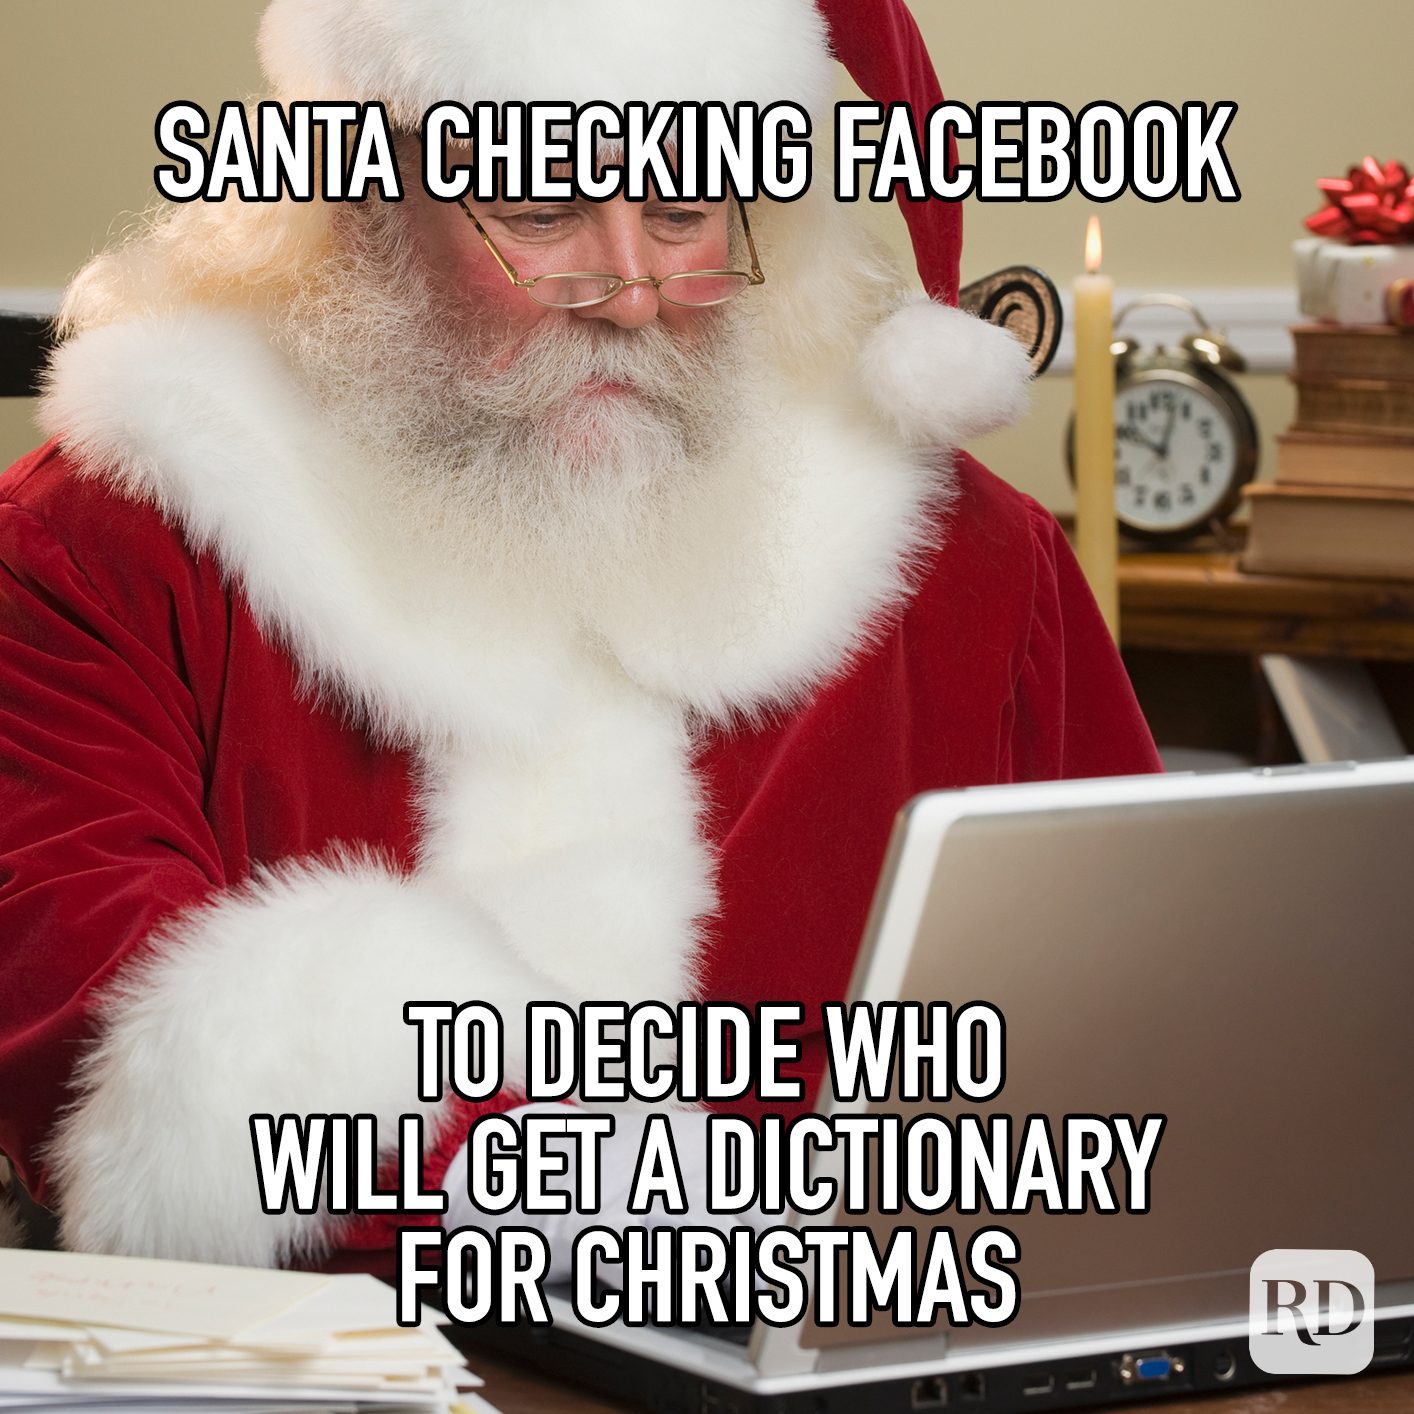 santa-checking-facebook-to-decide-who-will-get-a-dictionary-for-christmas.jpg